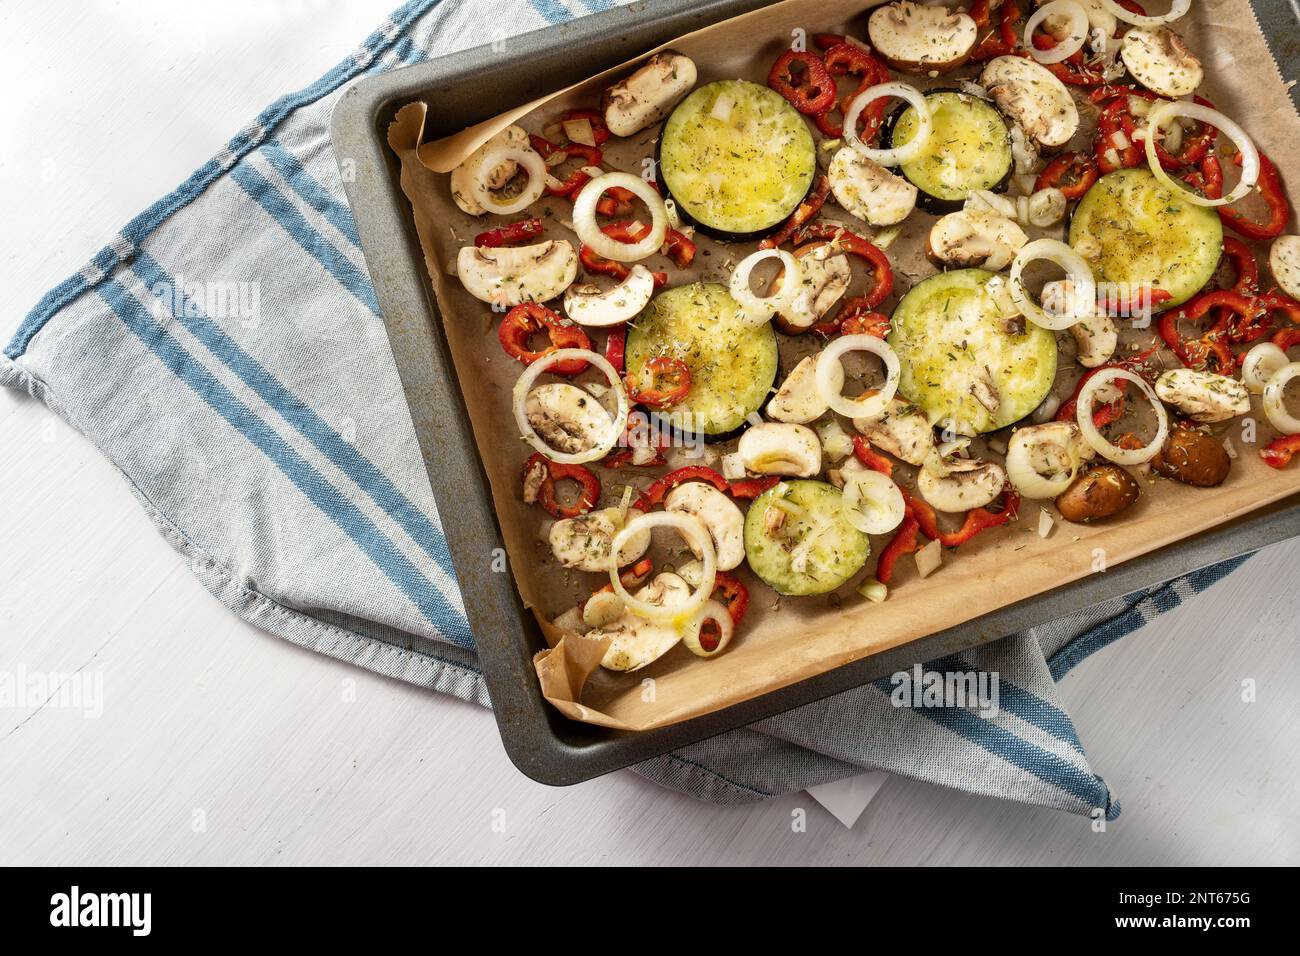 Vegetables with herbs and spices on a baking tray, blue towel and white table, Mediterranean vegetarian appetizer, copy space, high angle view from ab Stock Photo